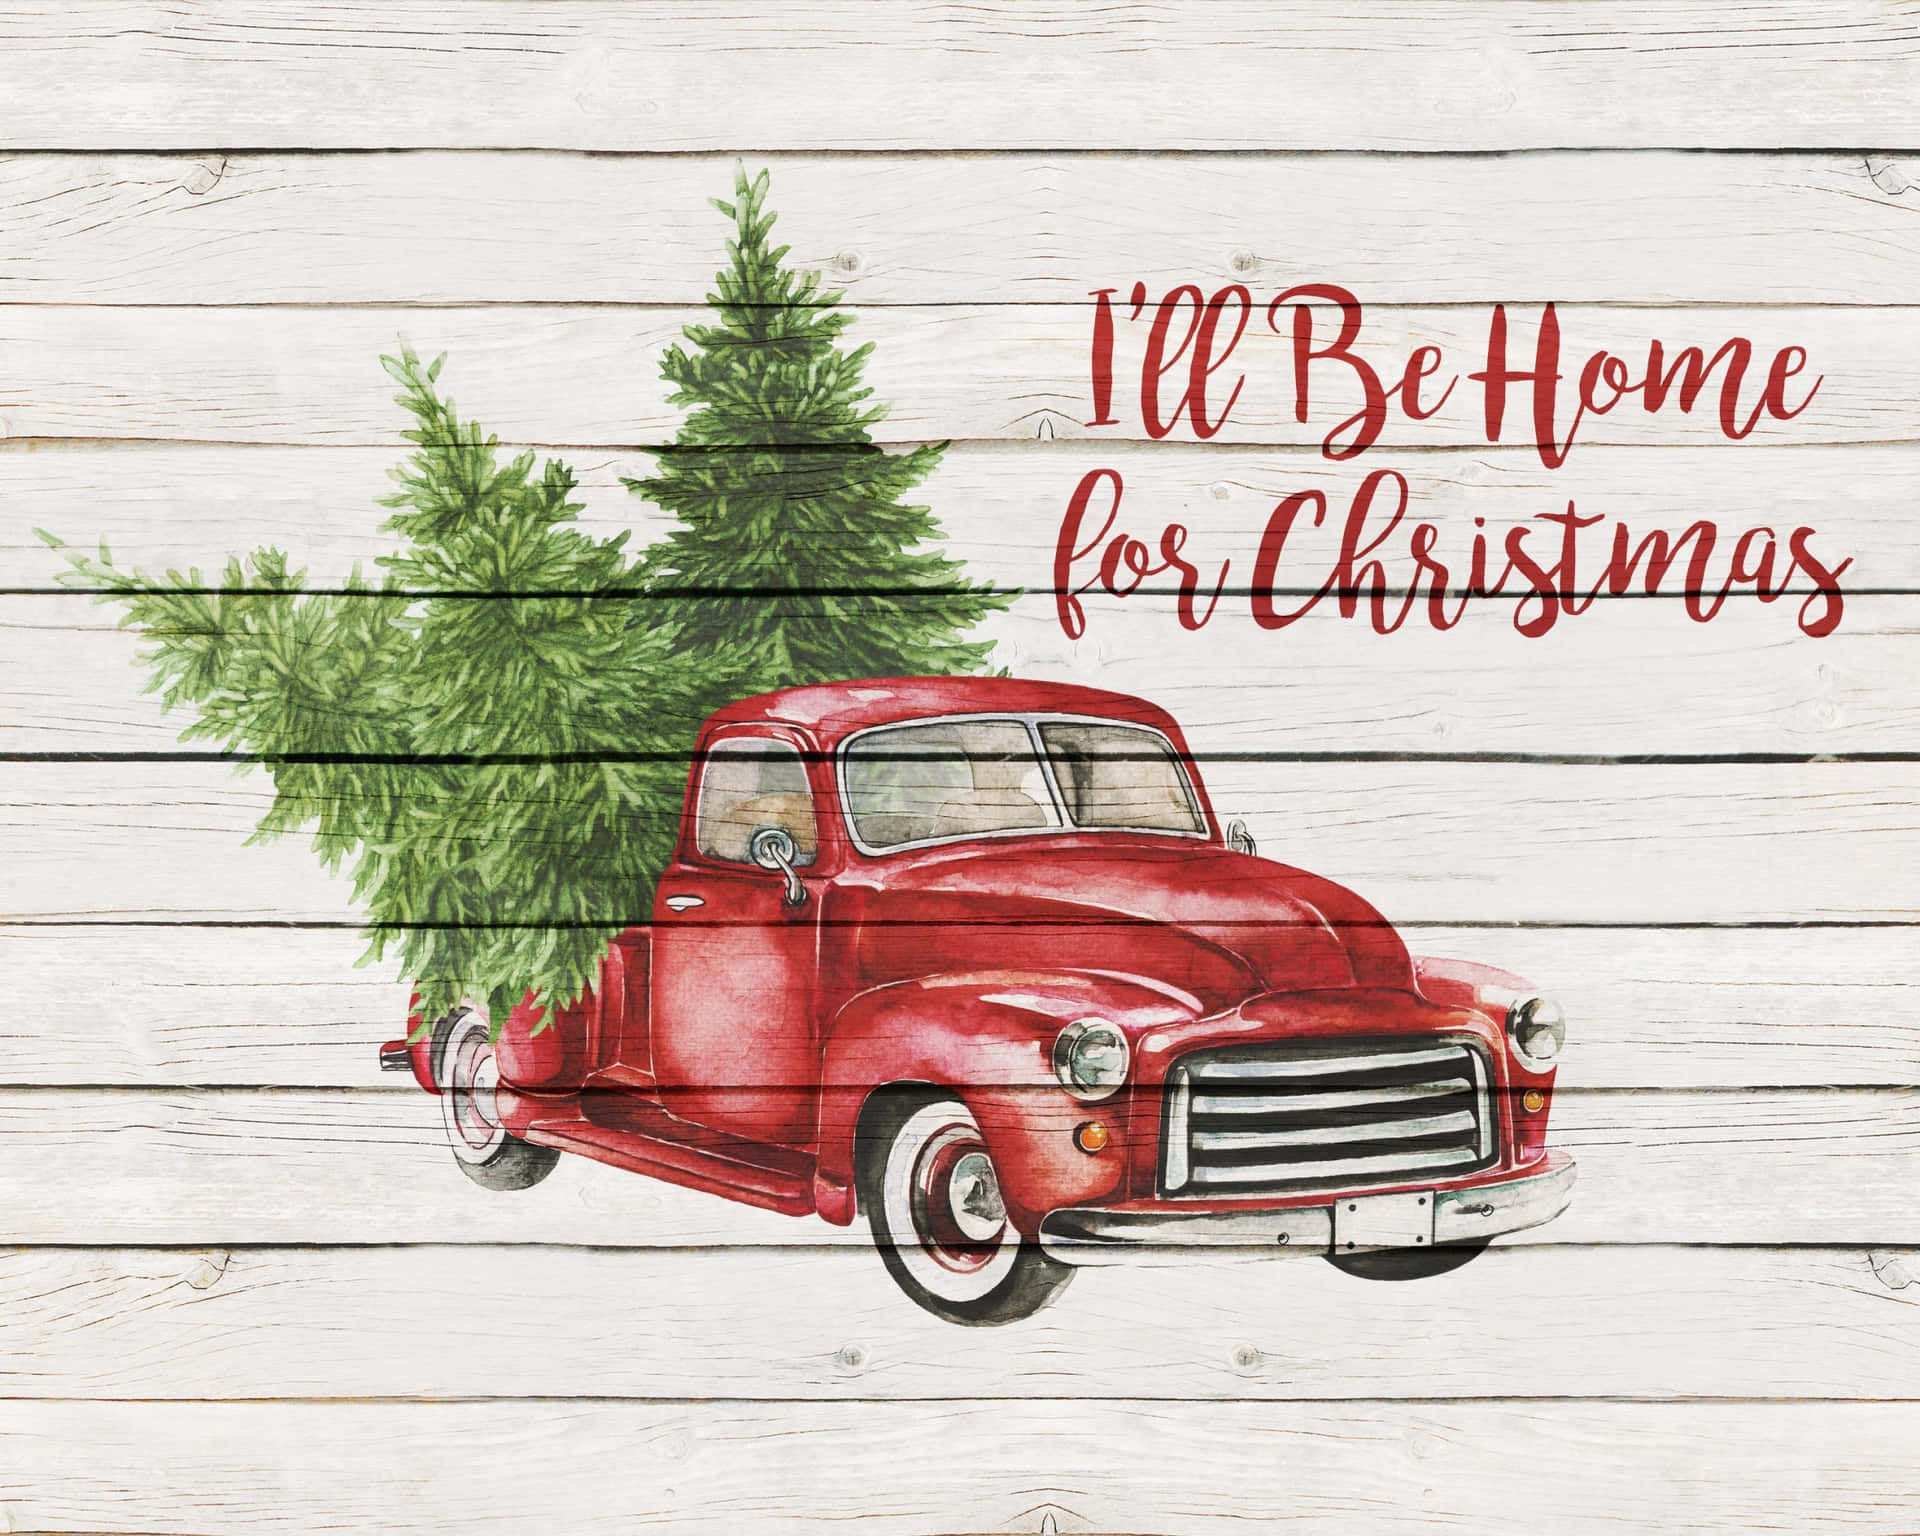 Pickup Truck With Farmhouse Christmas Trees Wallpaper